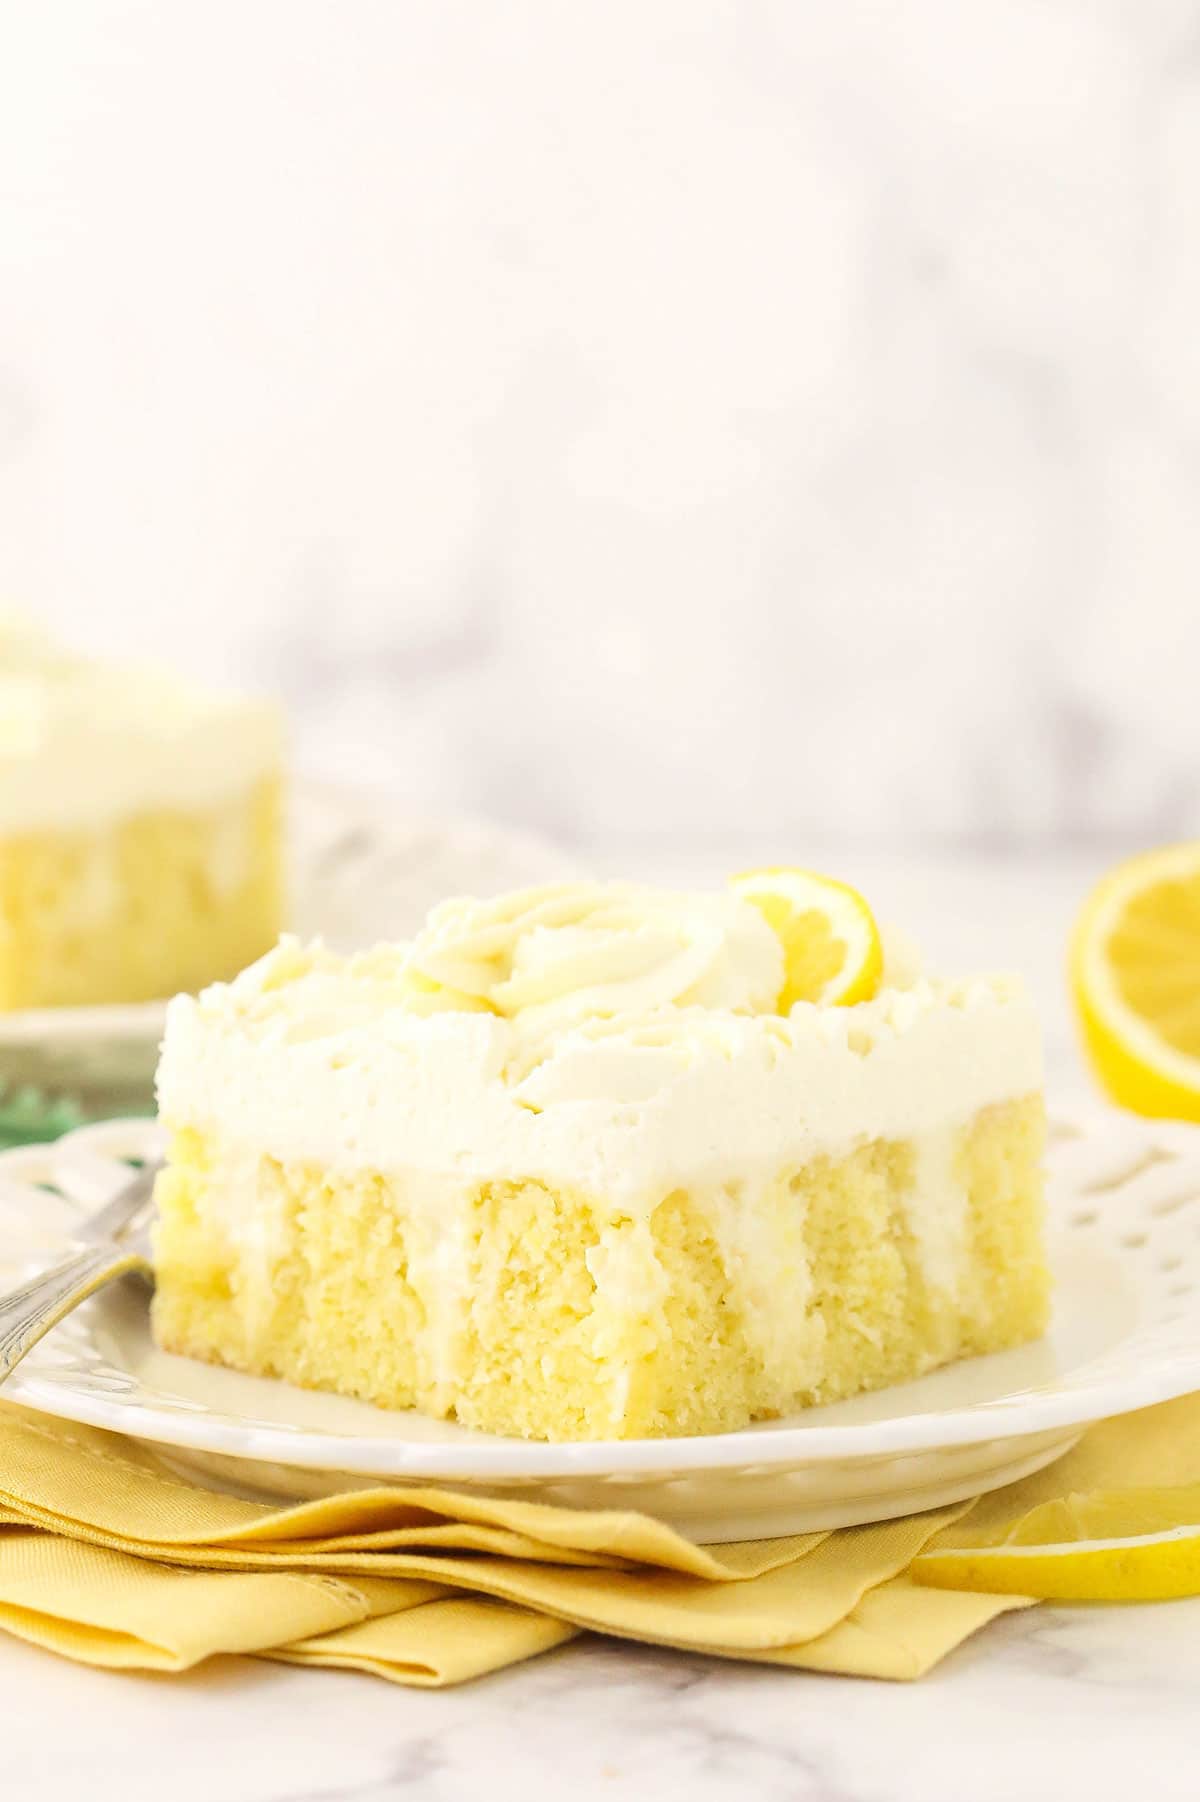 A slice of lemon poke cake on a white plate on top of a marble countertop